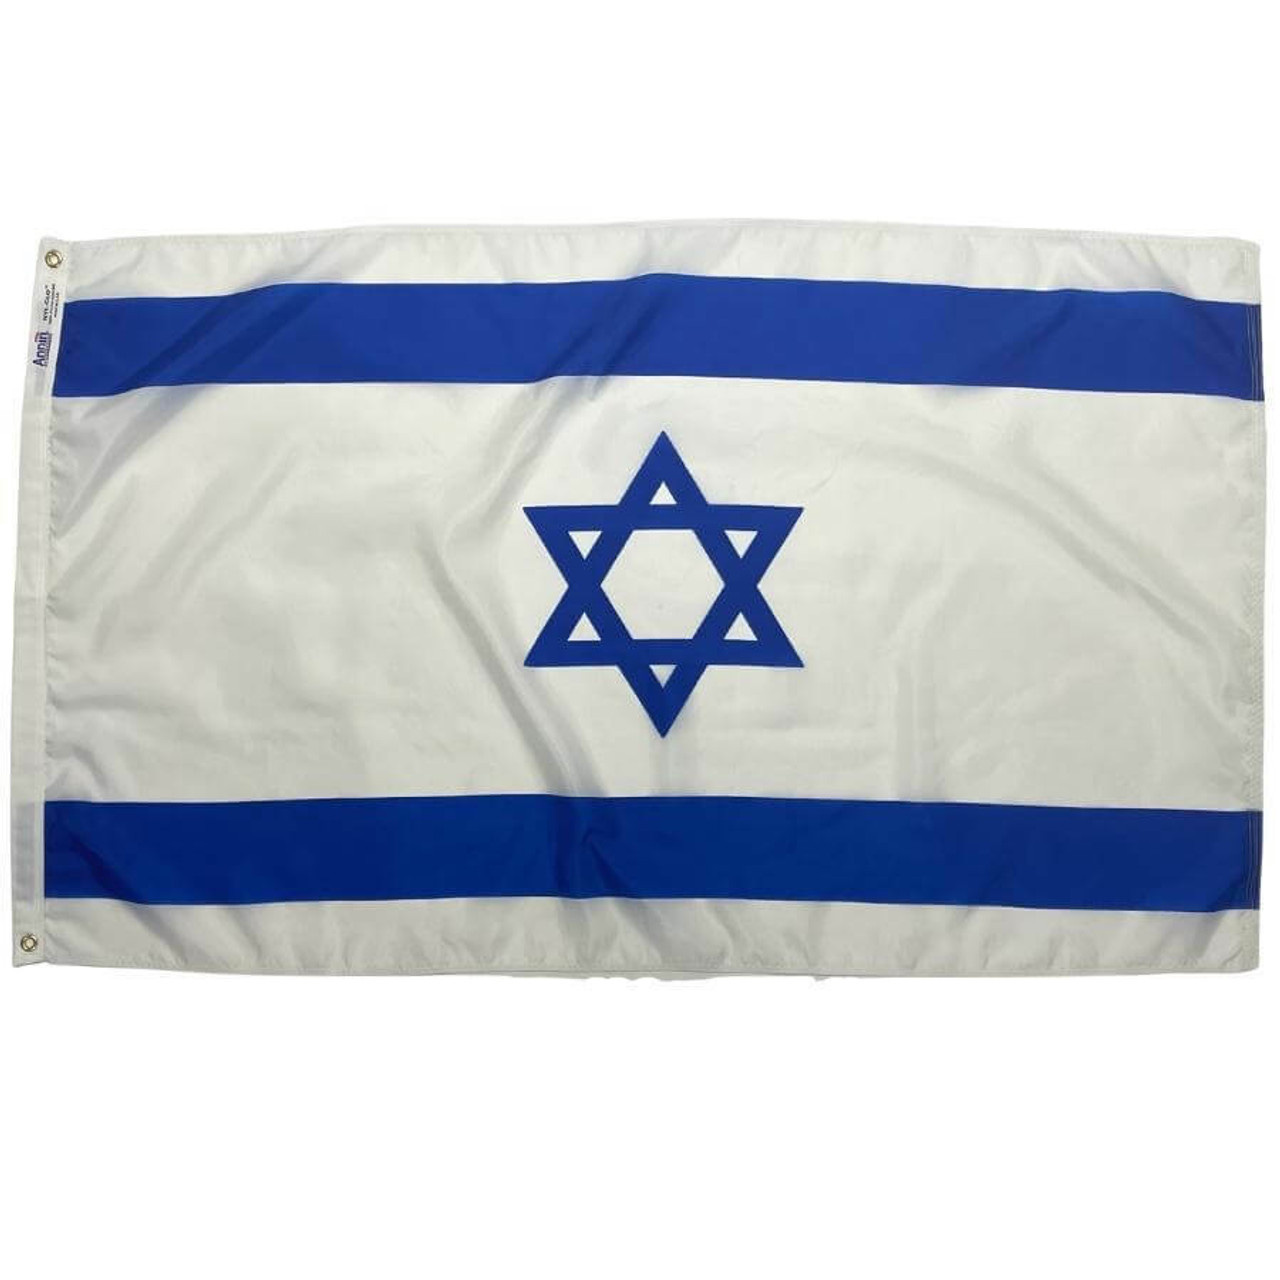 Israel’s flag has two horizontal blue stripes with a Star of David in between on a white background.